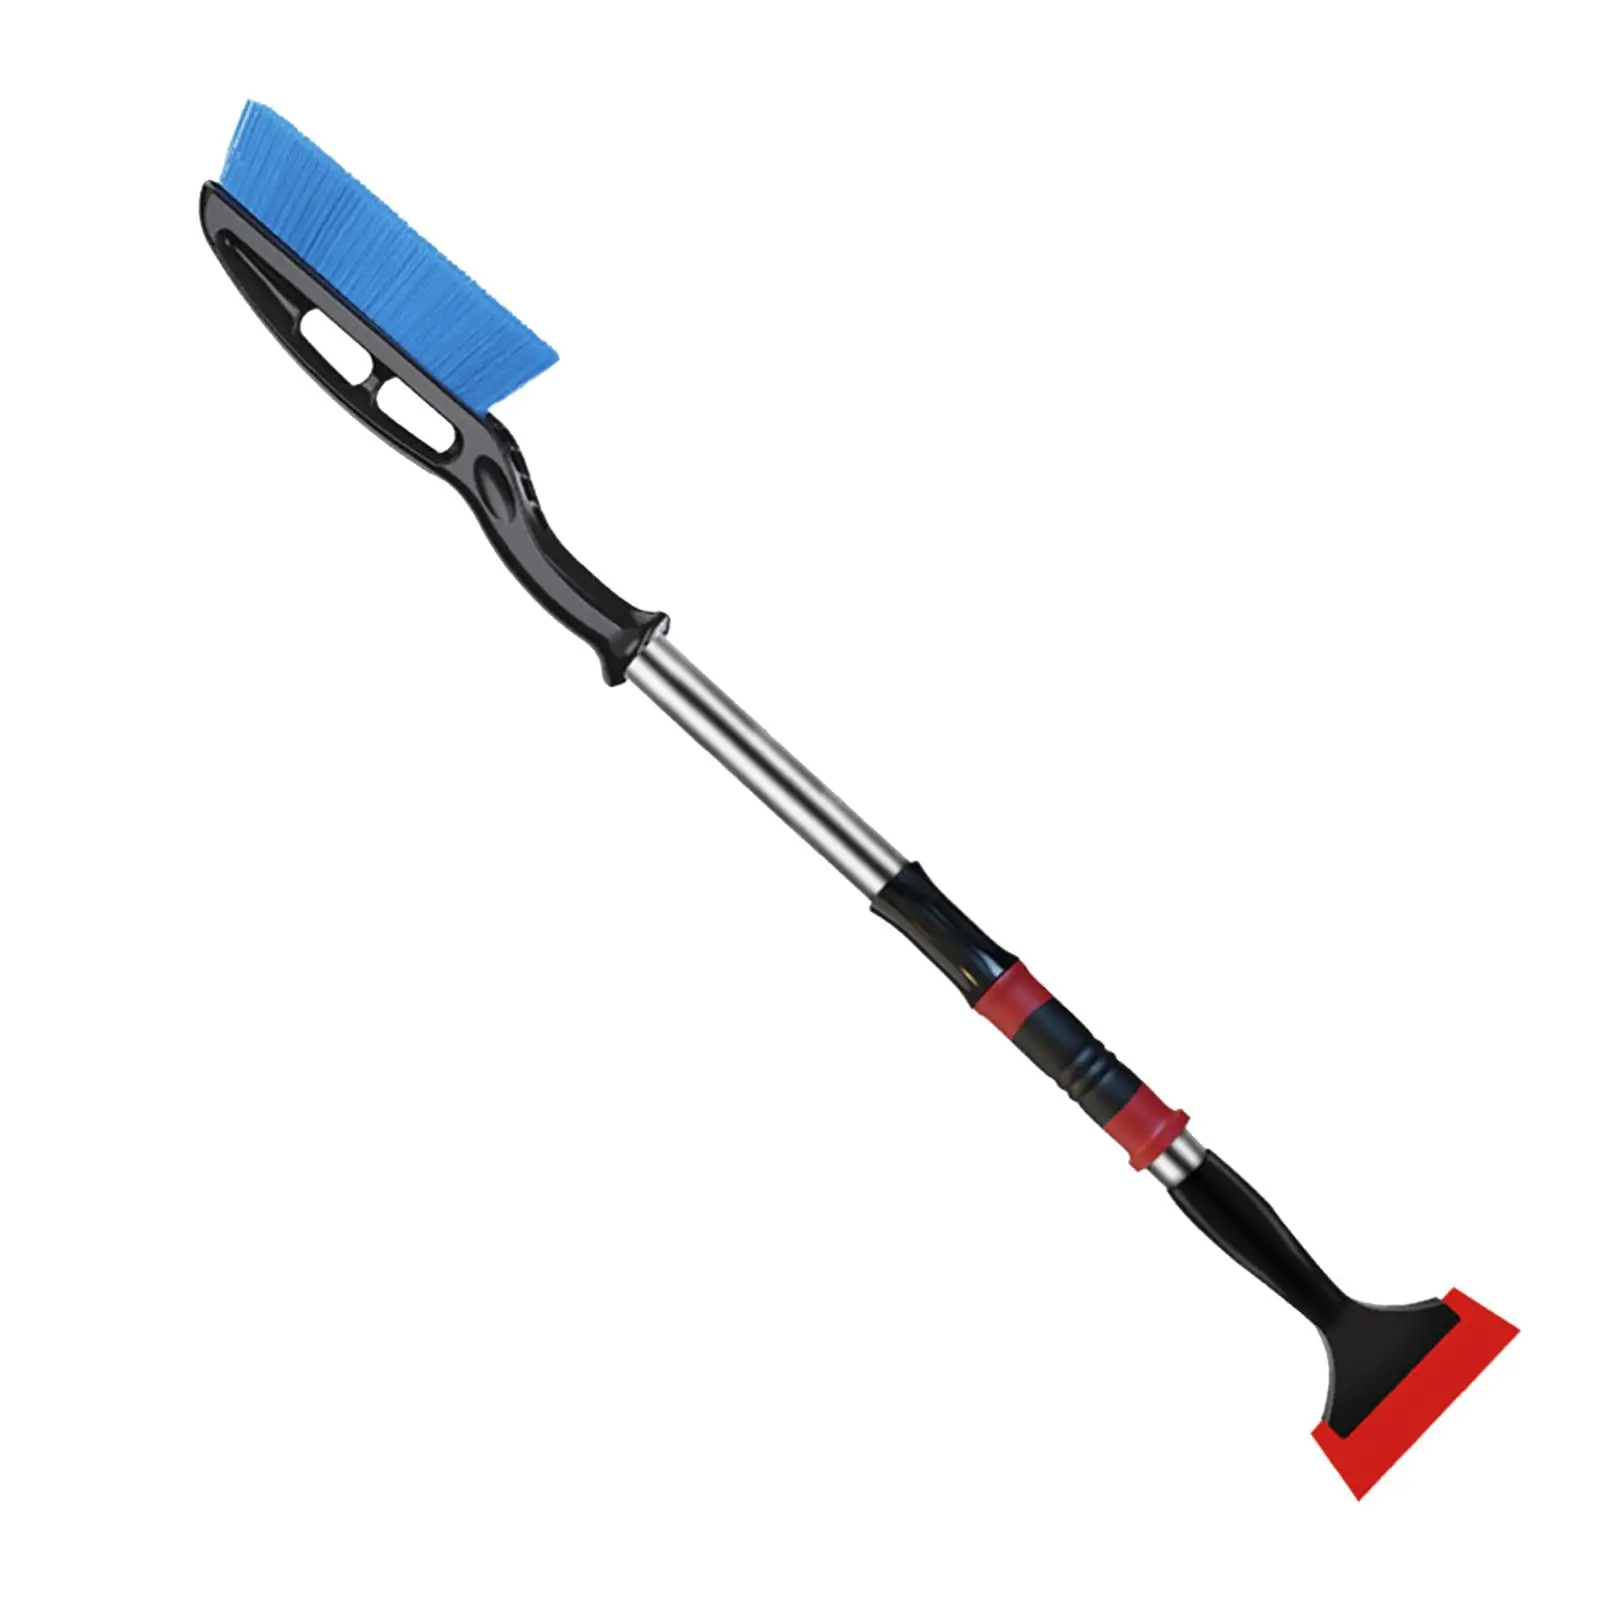 Car Snow Removal Brush Shovel Lightweight Winter for Auto SUV Vehicles